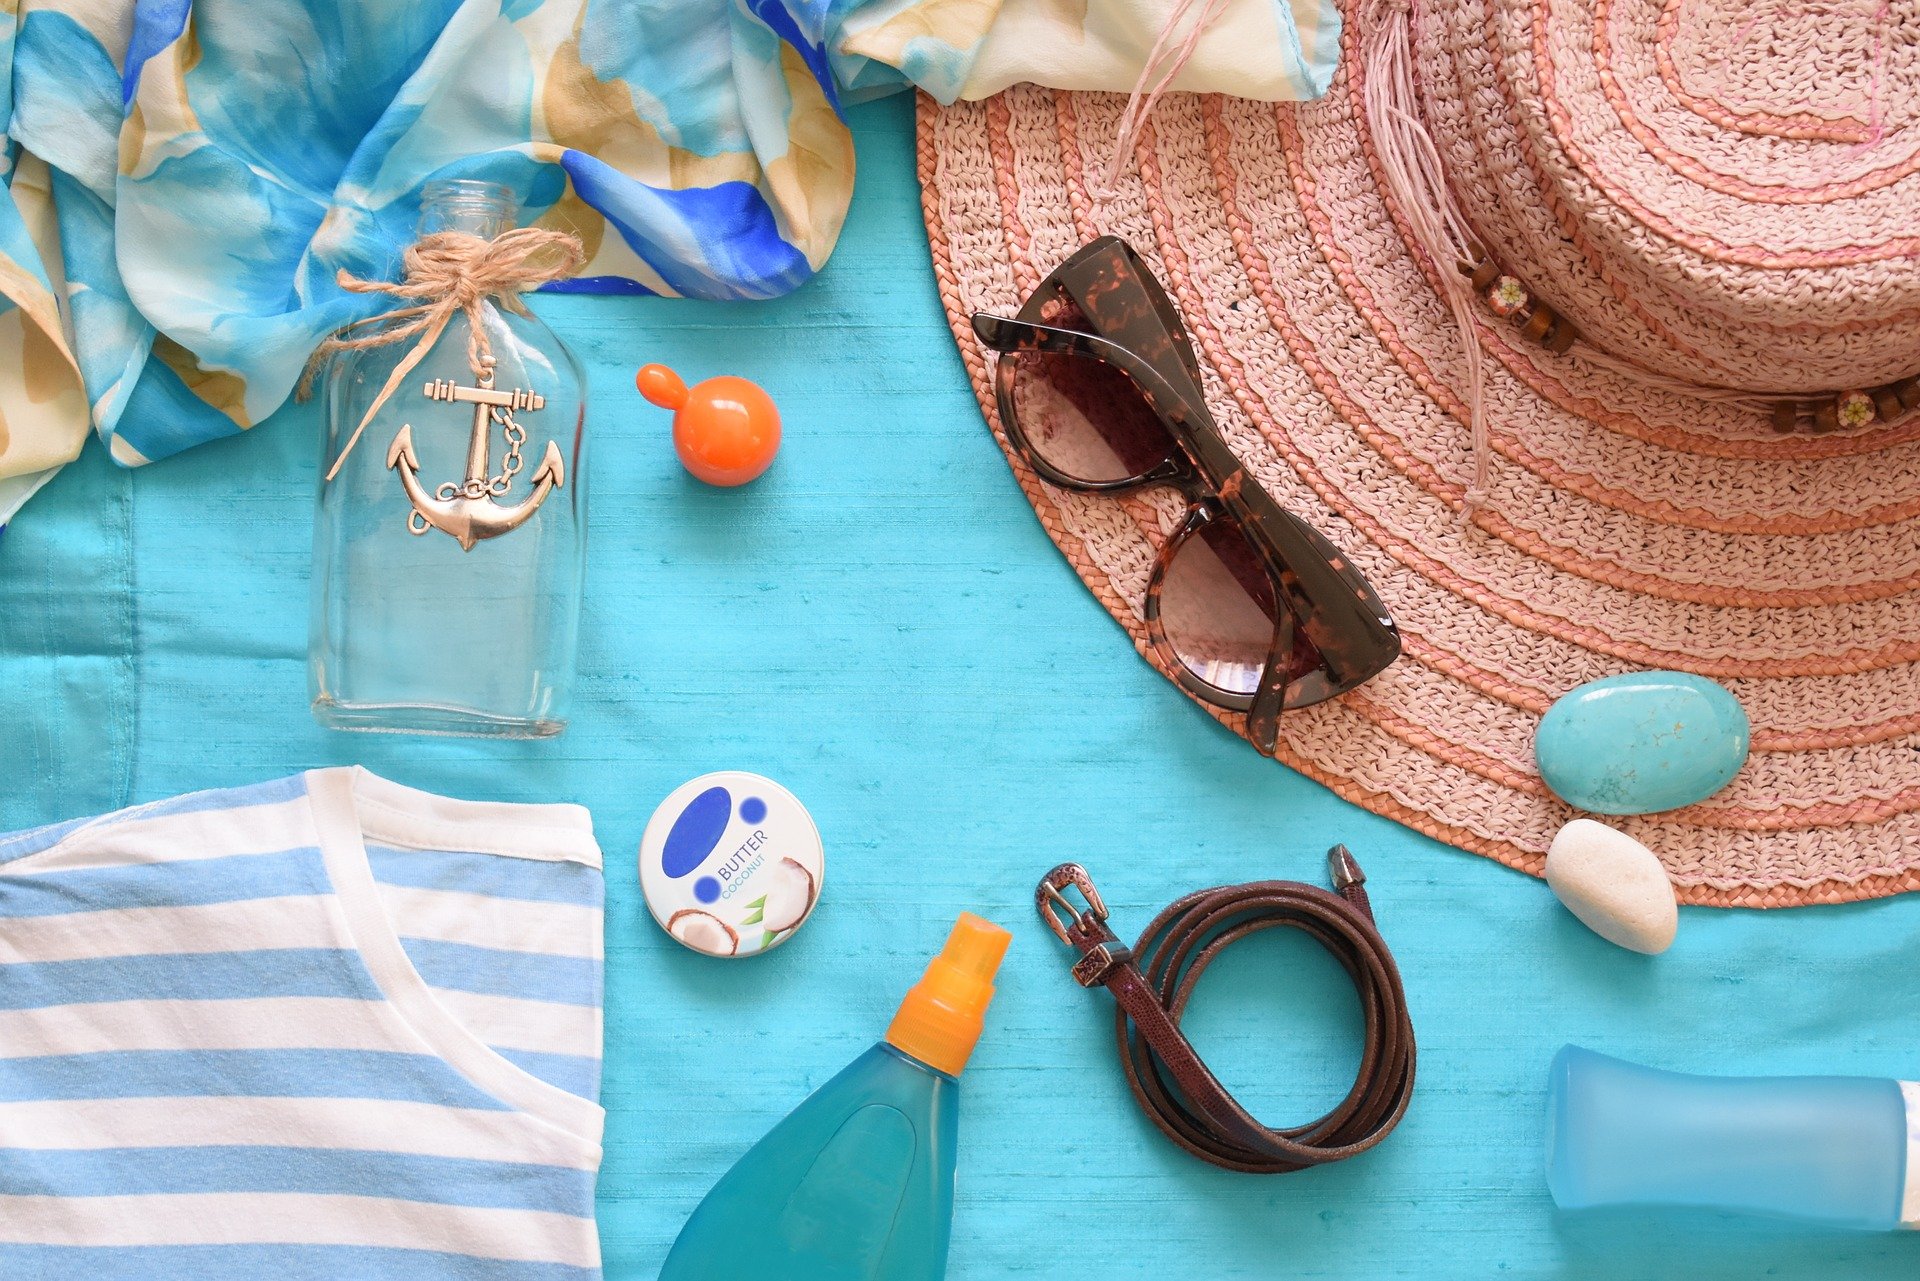 Beach Hat or Cap as one of your packing list for an island getaway